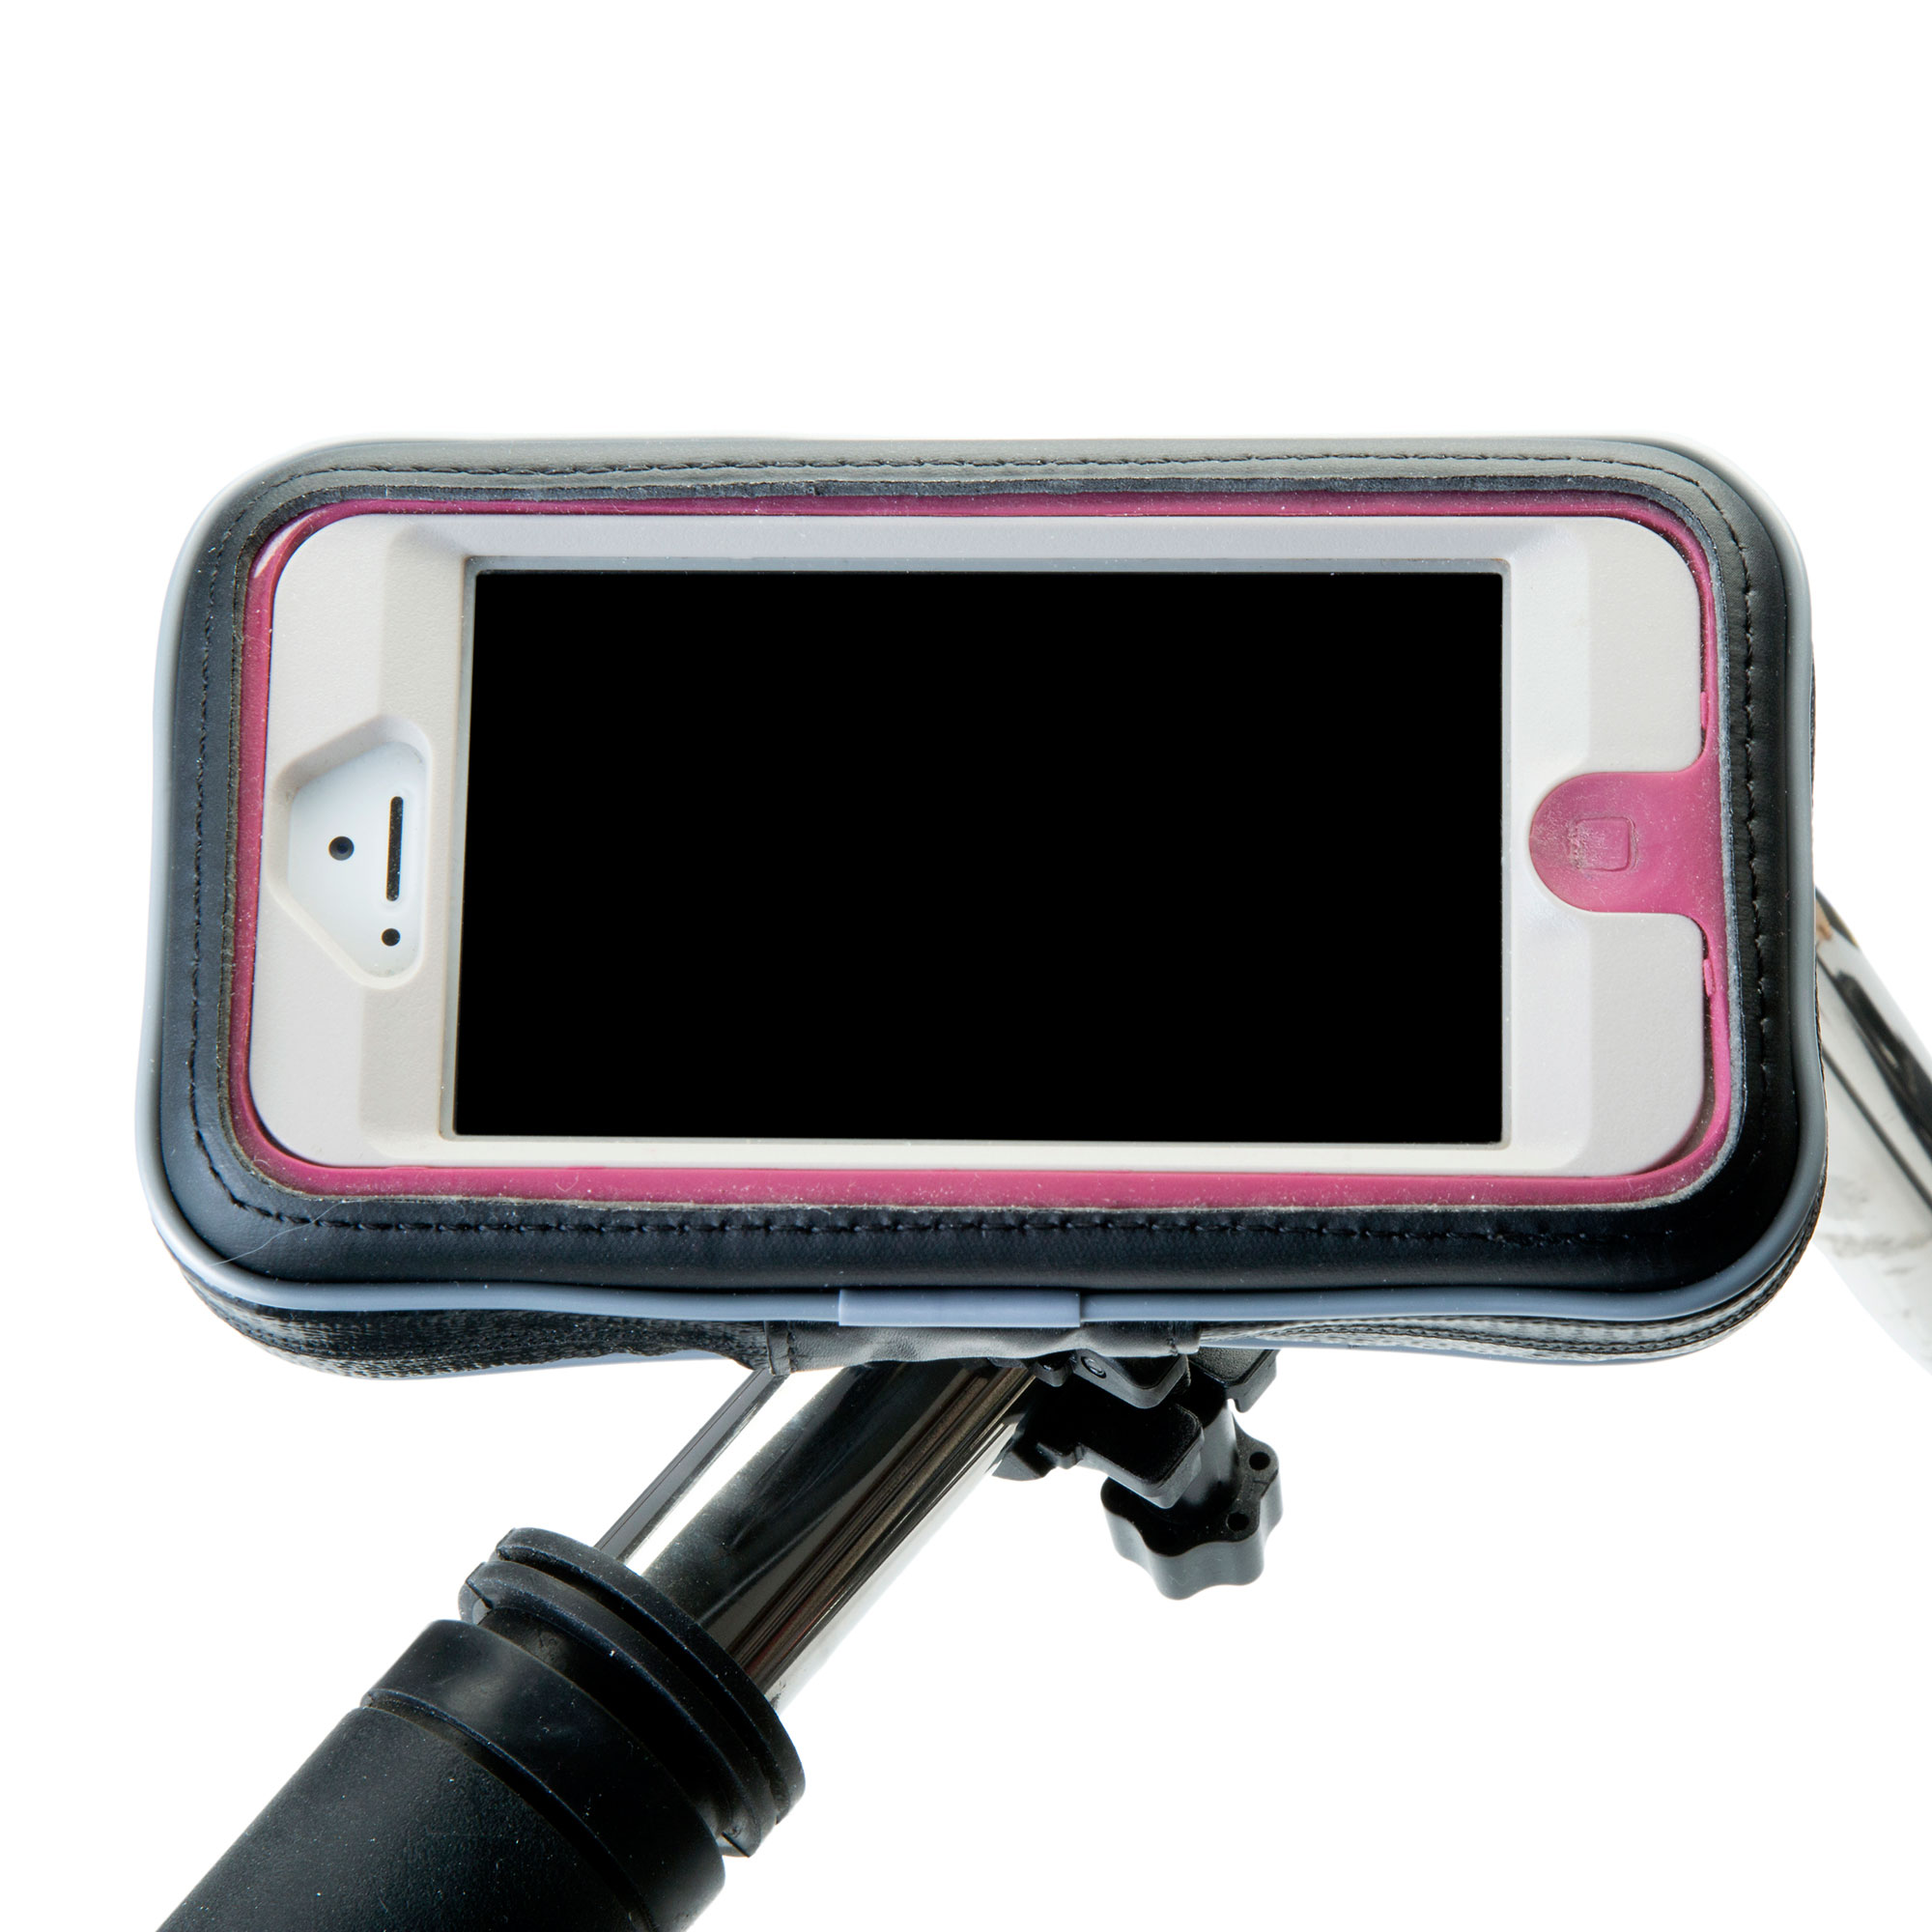 Heavy Duty Weather Resistant Bicycle / Motorcycle Handlebar Mount Holder Designed for the HTC One mini